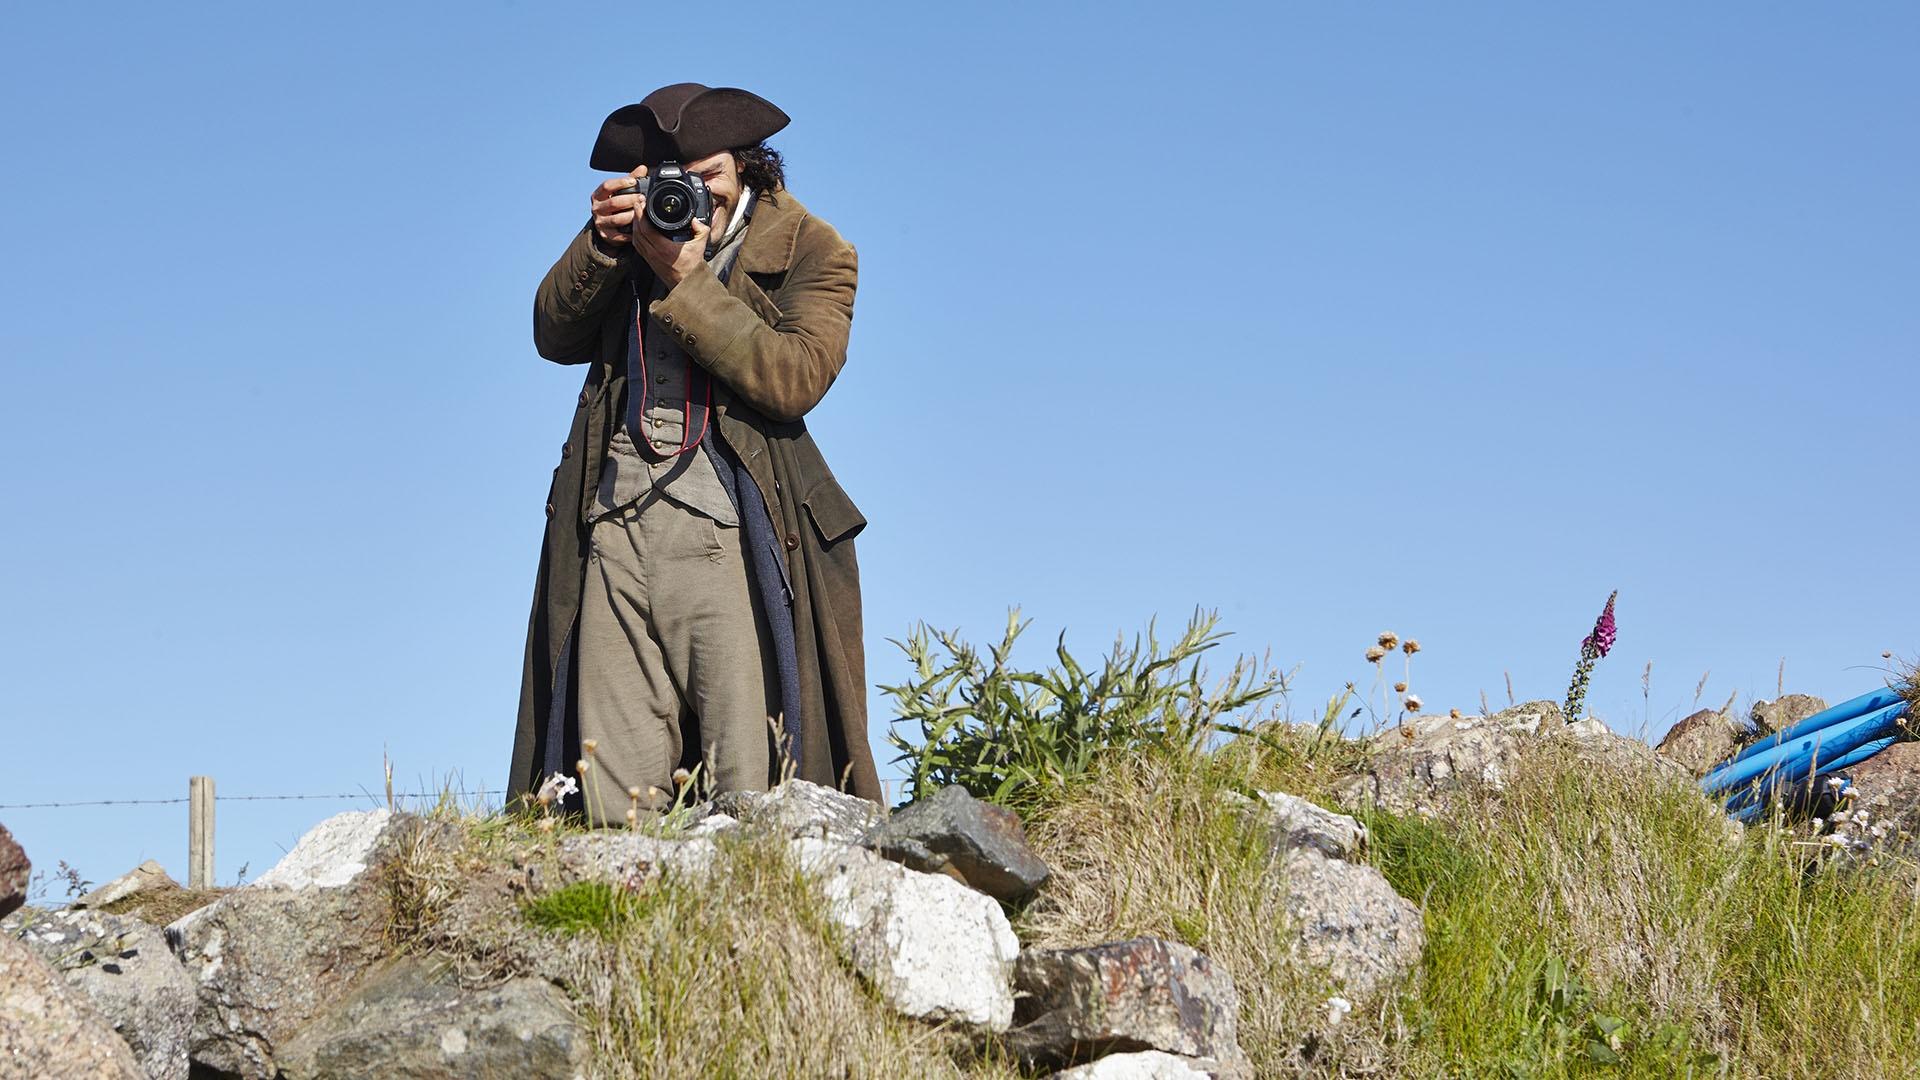 Aidan Turner, in costume as Ross Poldark, takes a photo of the photographer.